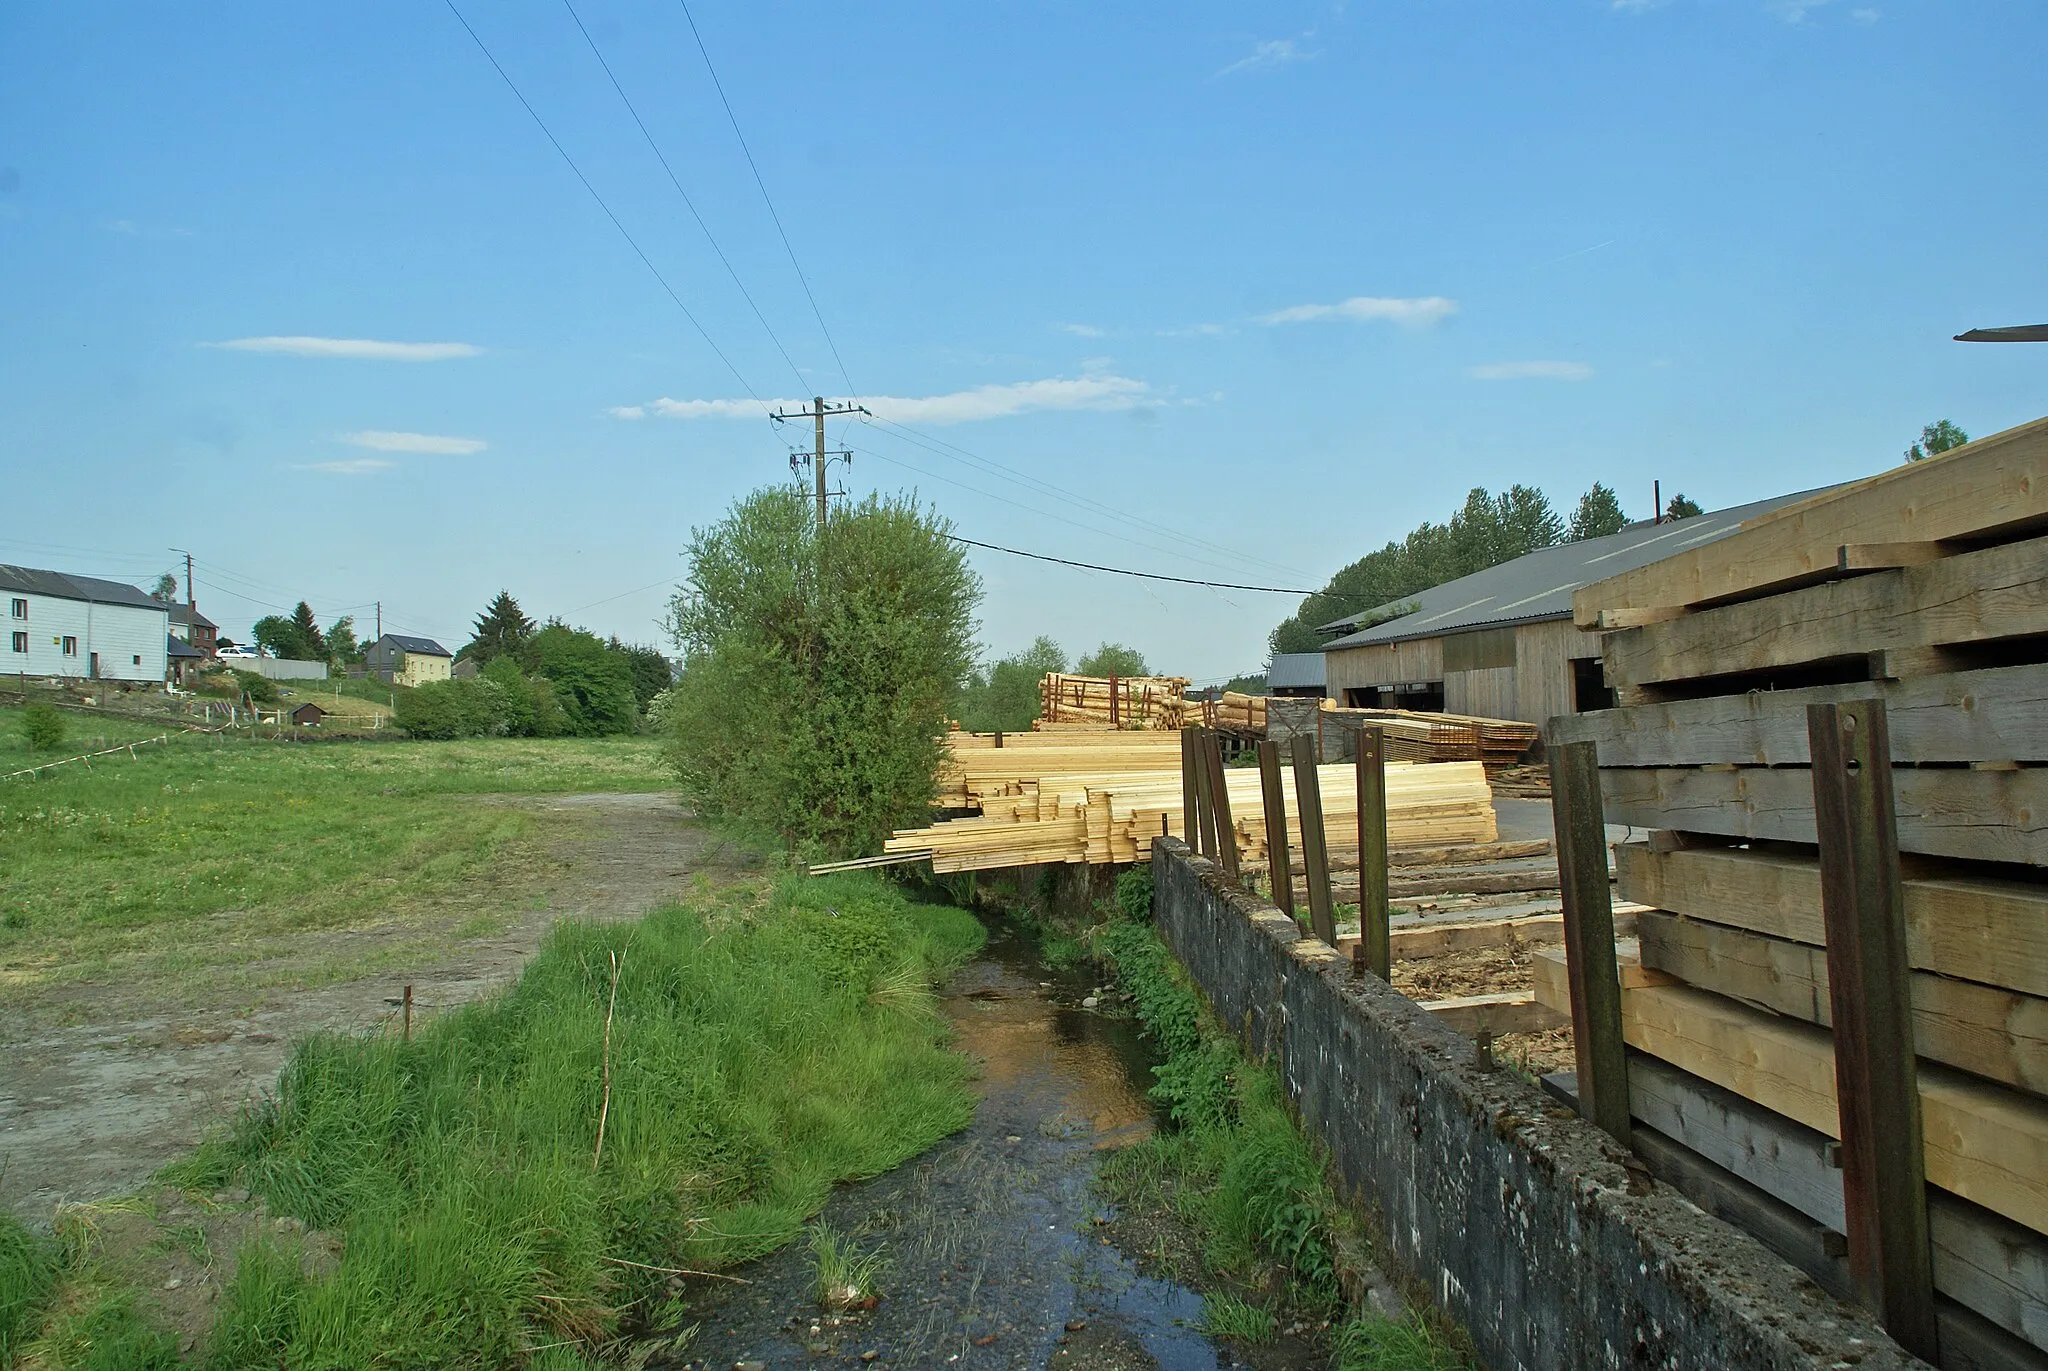 Photo showing: Vaux-sur-Sûre, Belgium: The sawmill at the right bank of the river Sauer